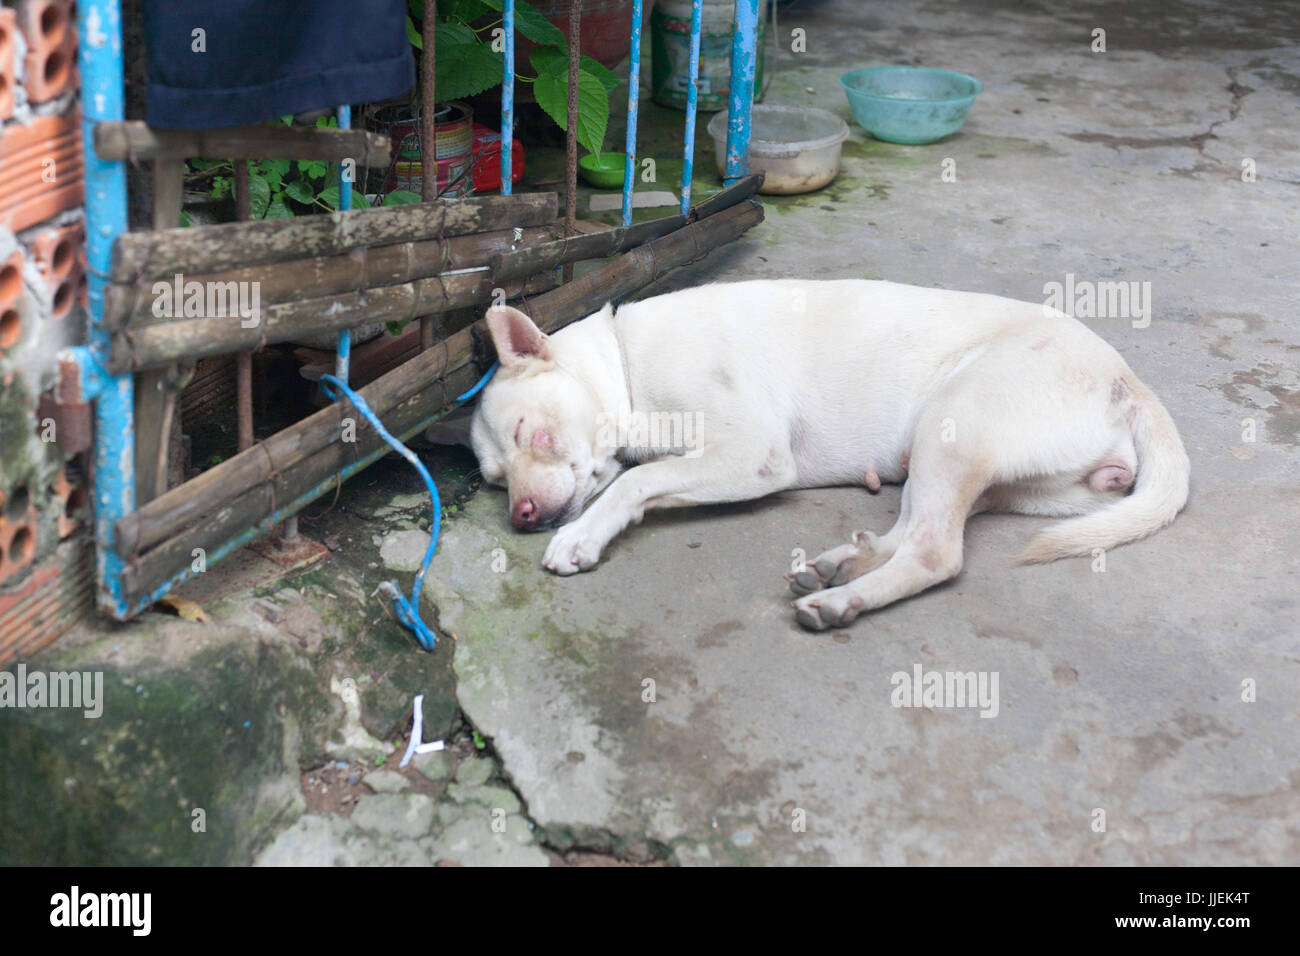 White female Stray dog with scars abandoned on the ground close to blue metal gate in vietnam Stock Photo